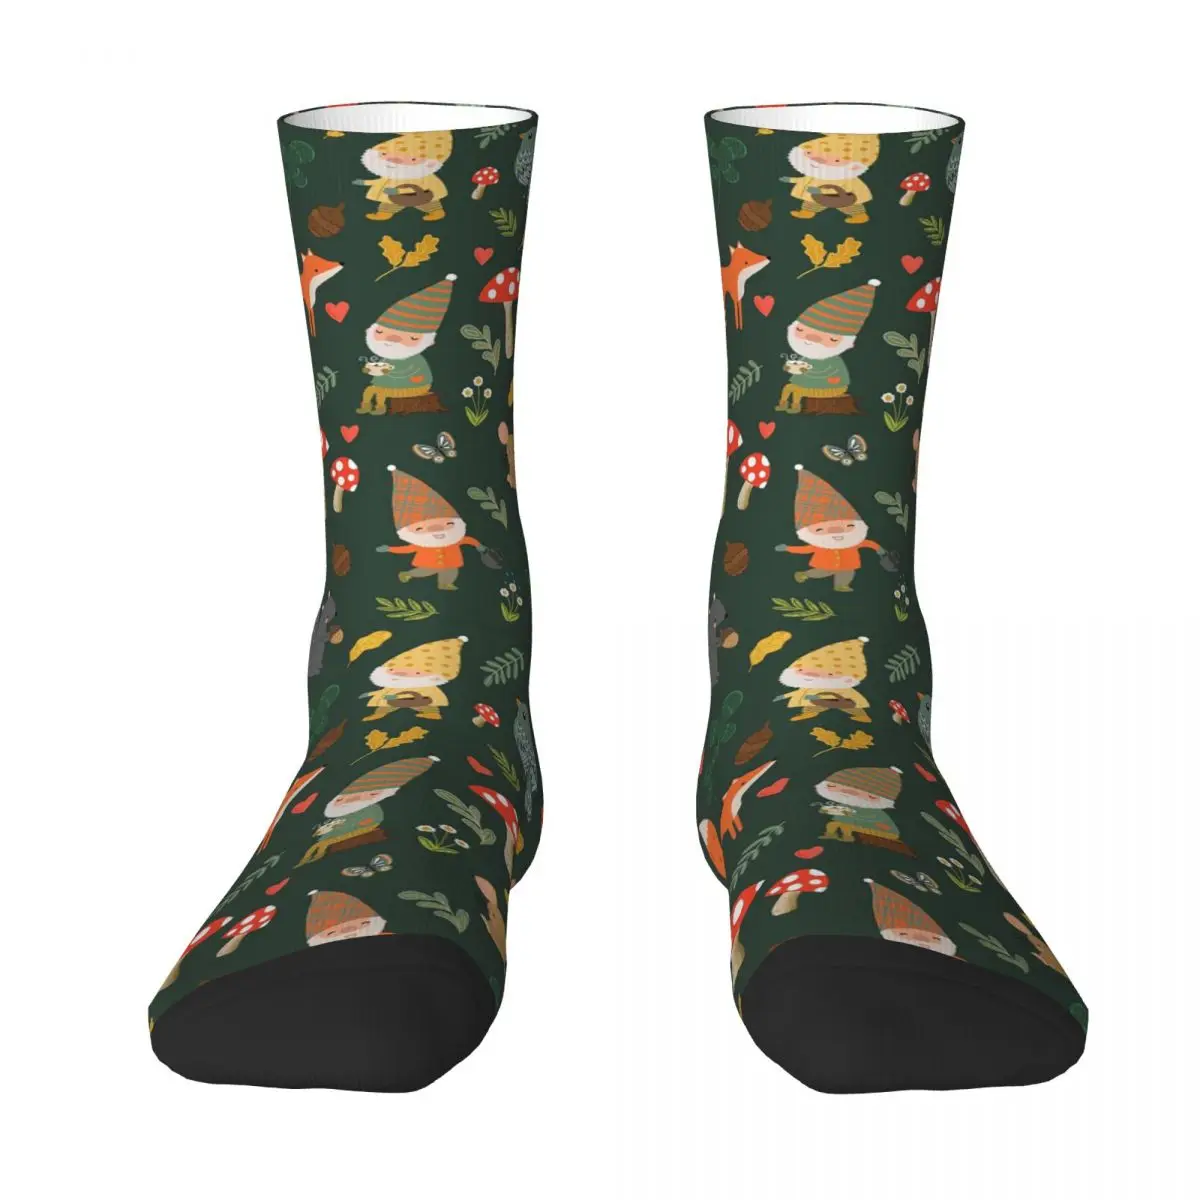 

Gnomes And Woodland Creatures Socks Harajuku High Quality Stockings All Season Long Socks Accessories for Unisex Gifts